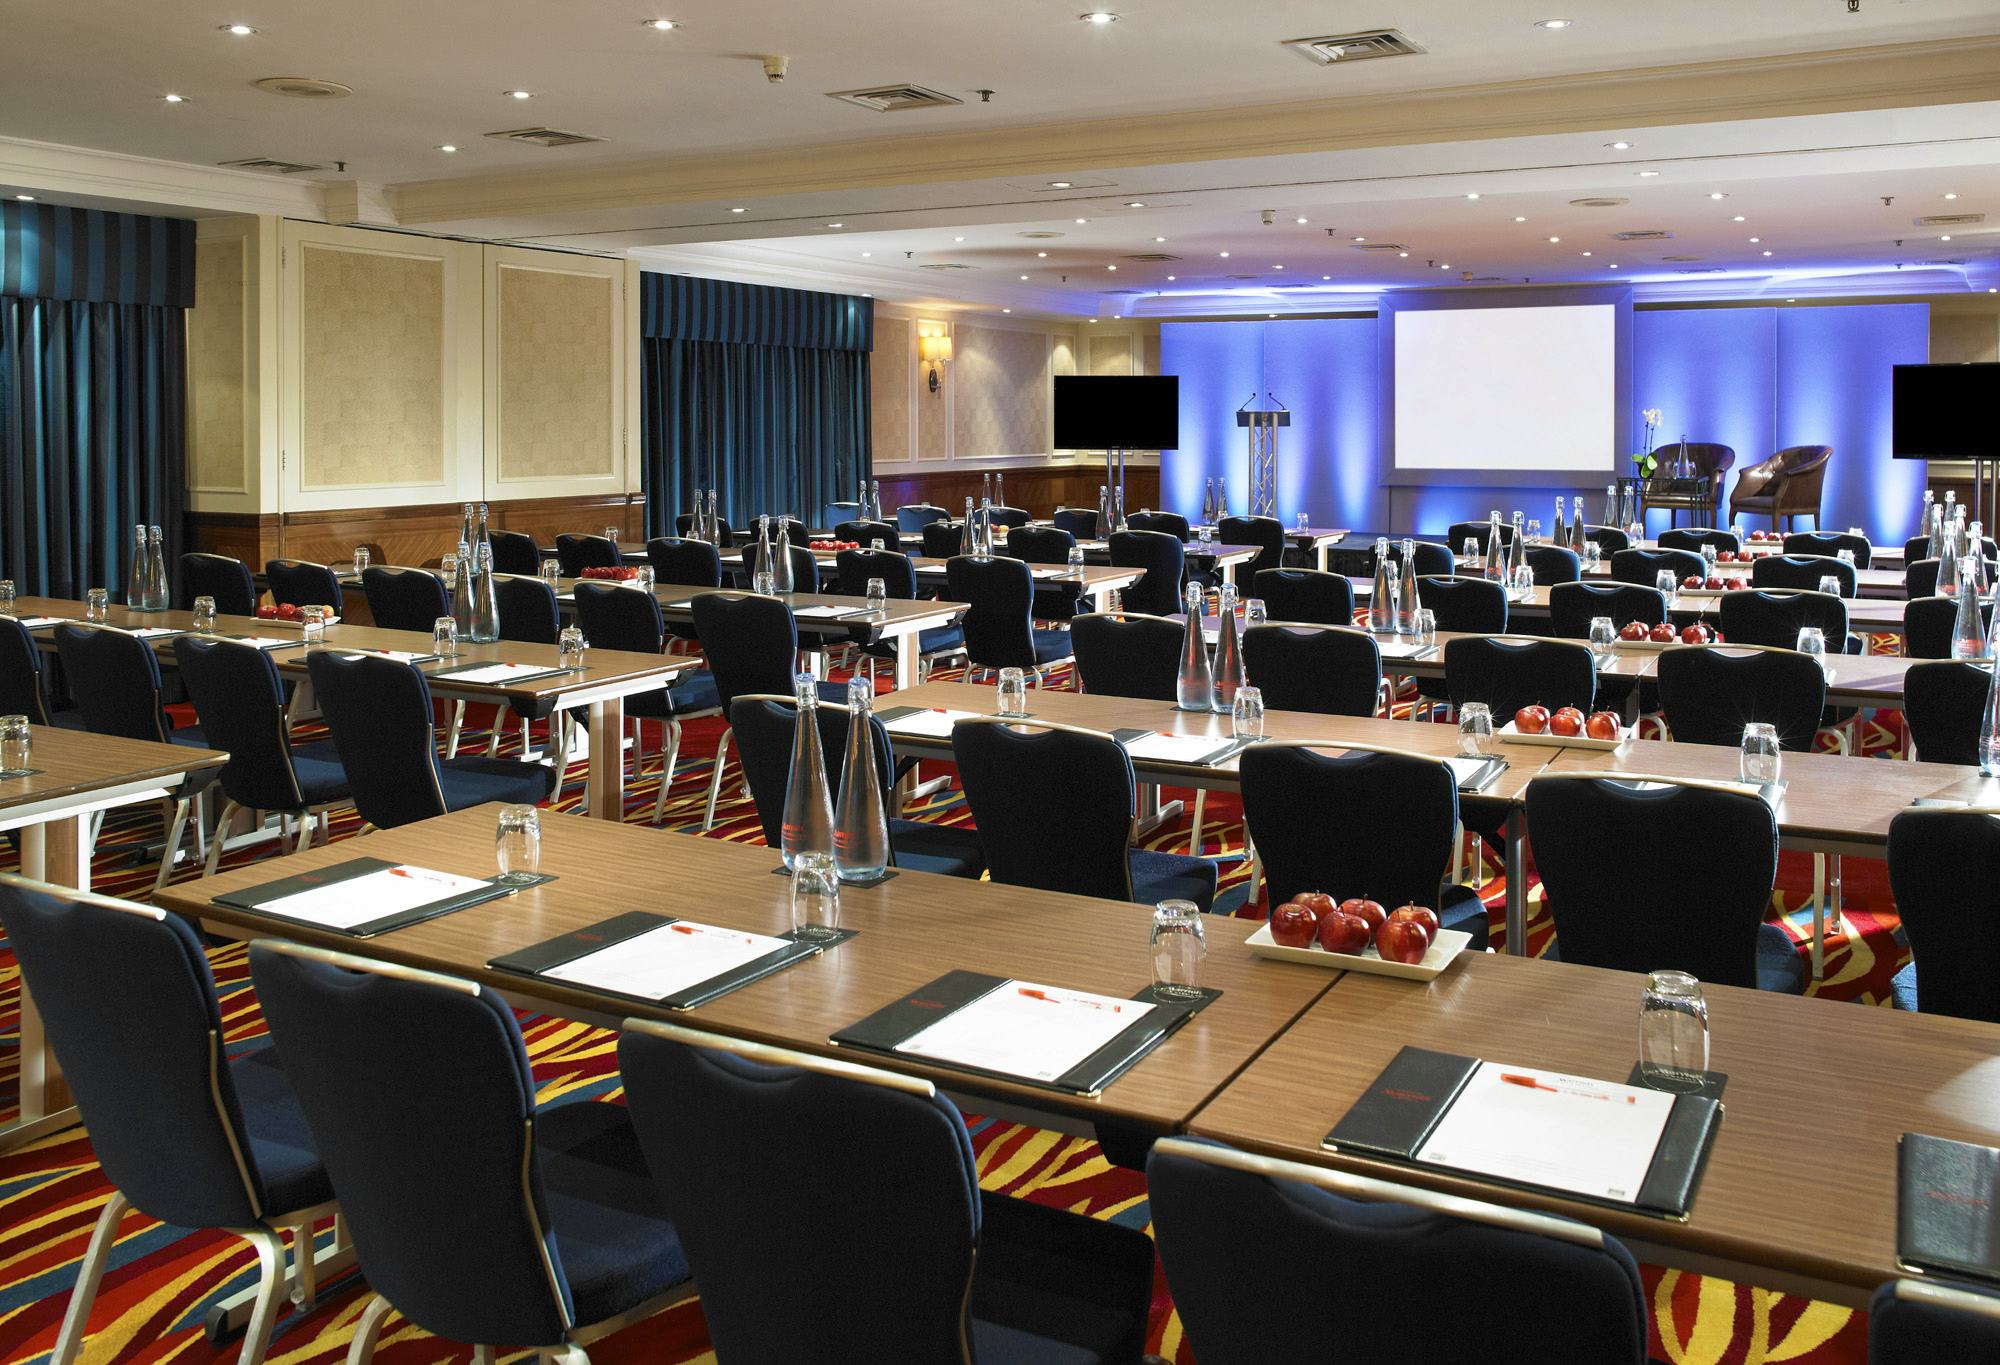 London Marriott Hotel Marble Arch venue hire meetings conferences annual company team